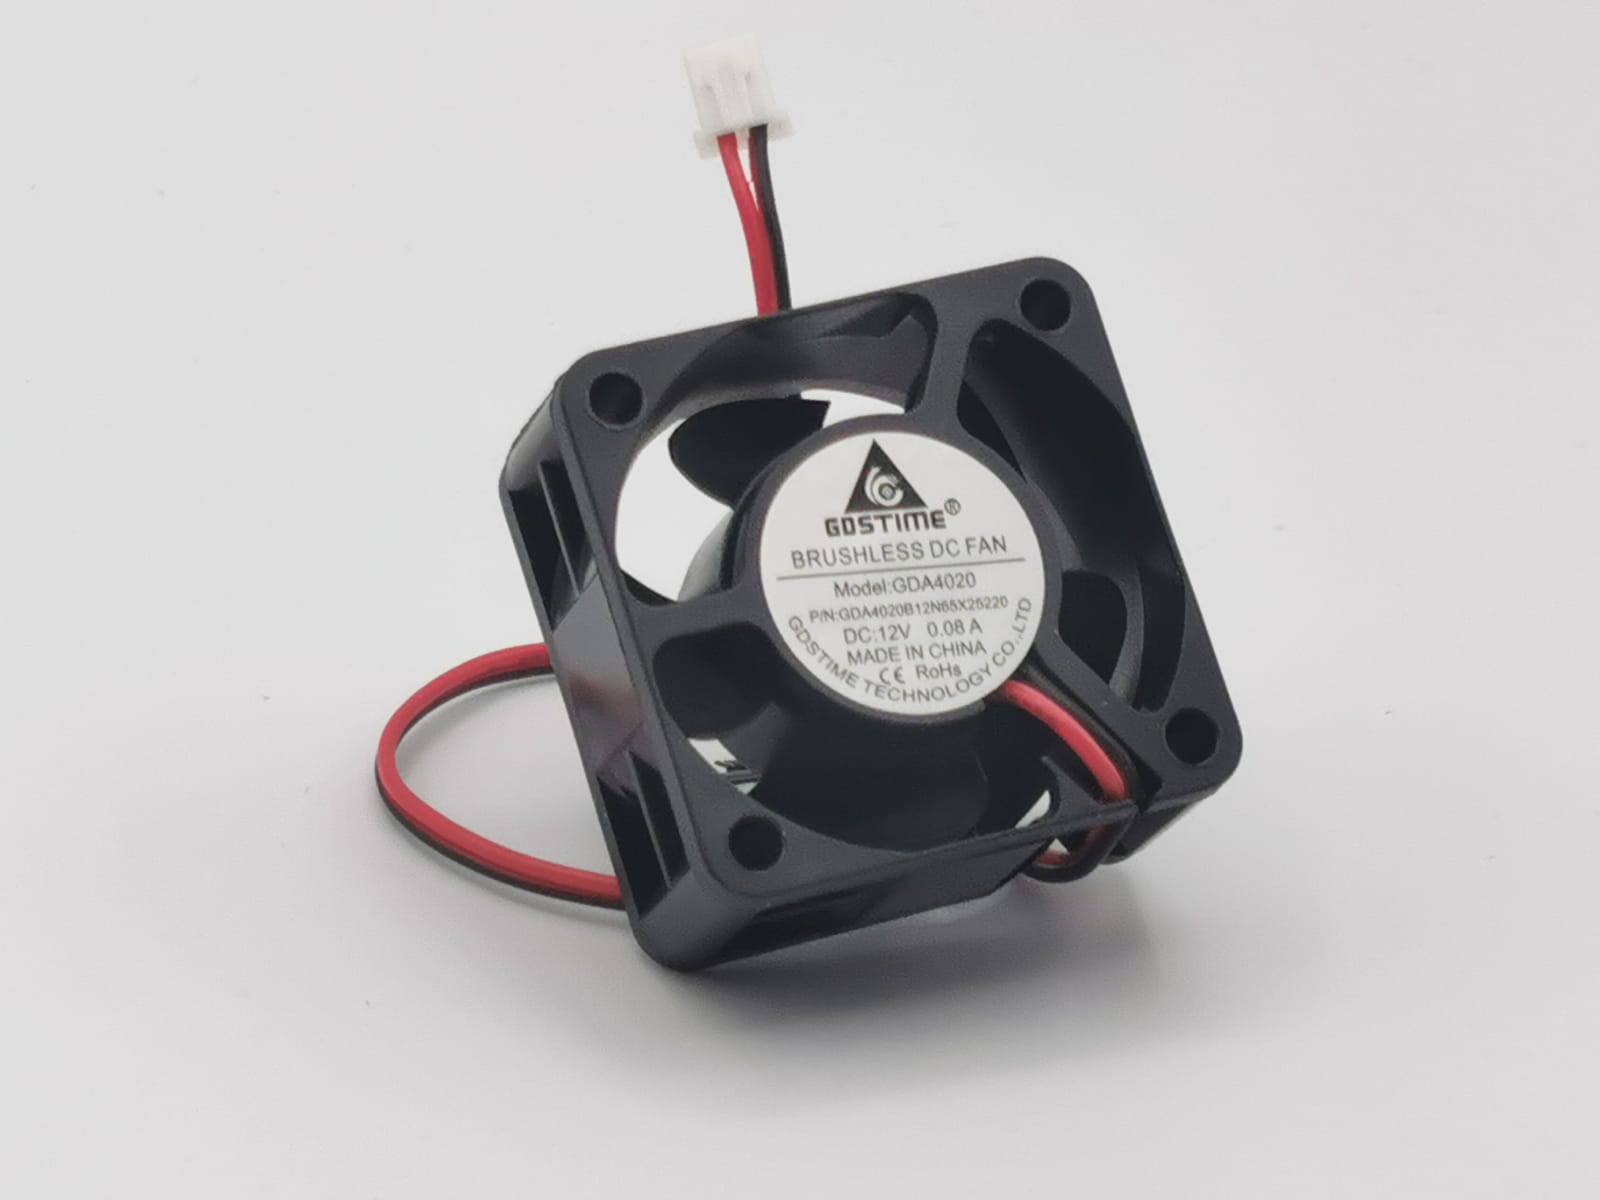 Brushless DC 4020 Axial Fans (2 pack)